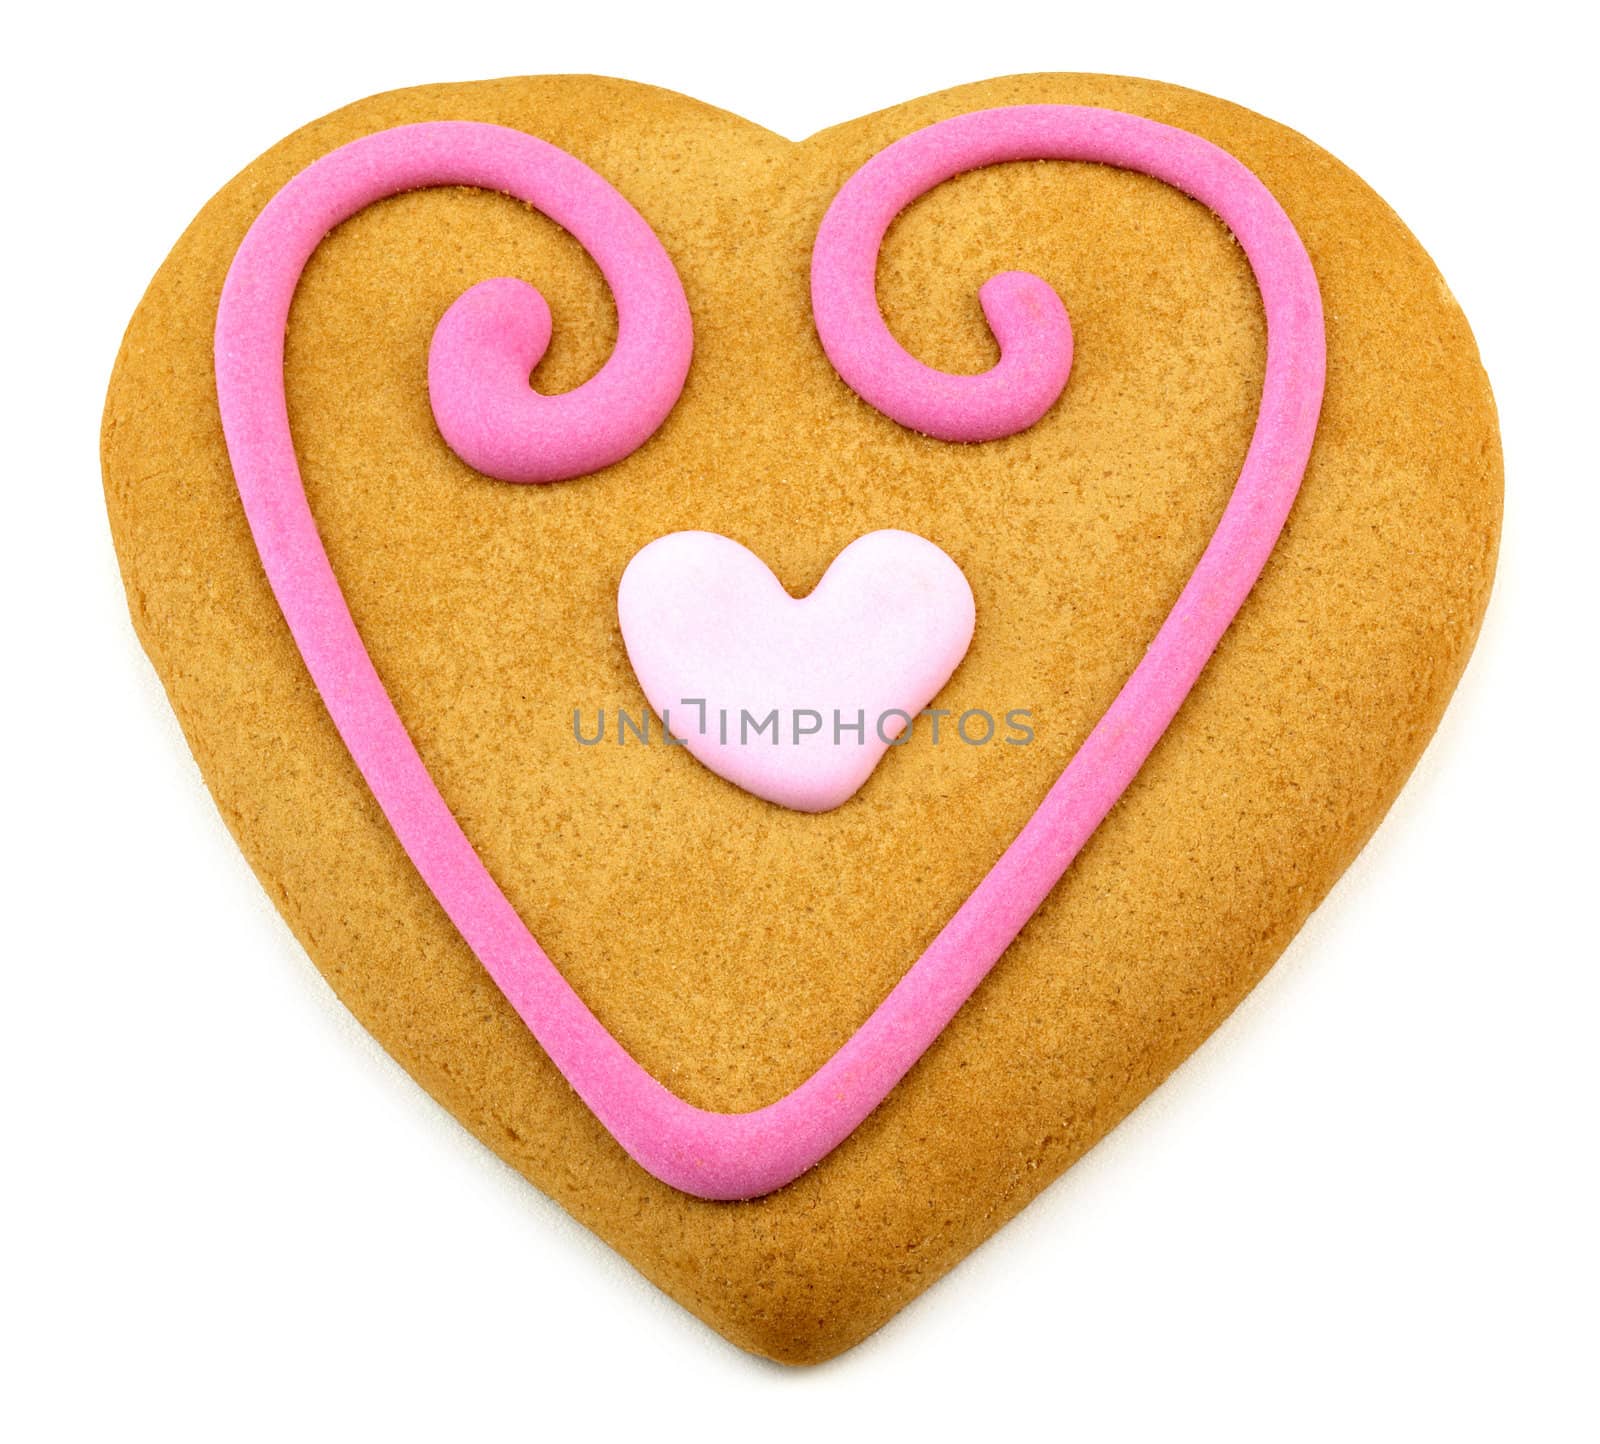 heart shaped cookie with a pink frosting decorations by BartKowski